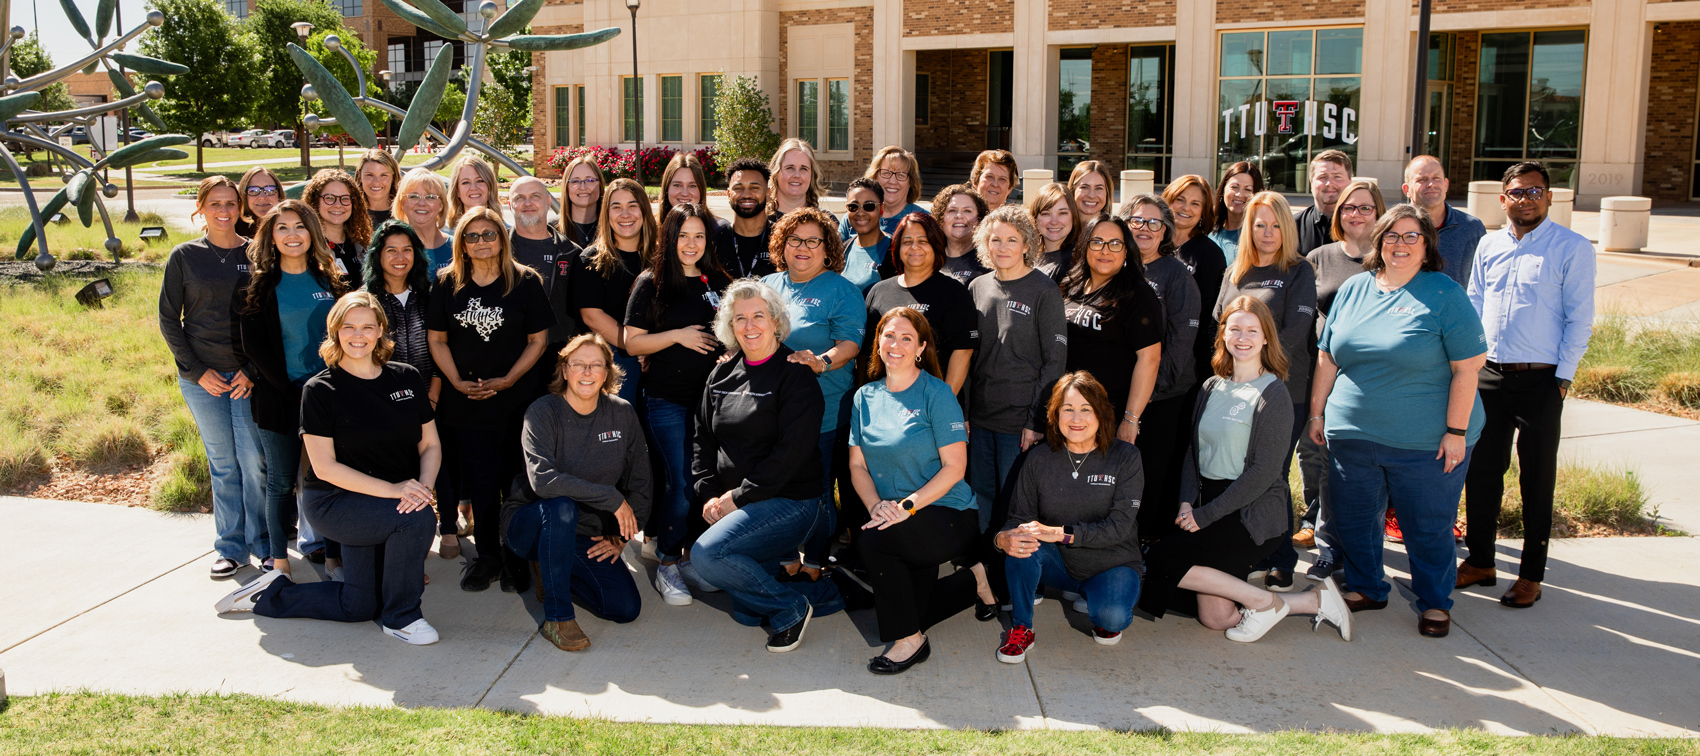 Group photo of the TTUHSC Division of Human Resources